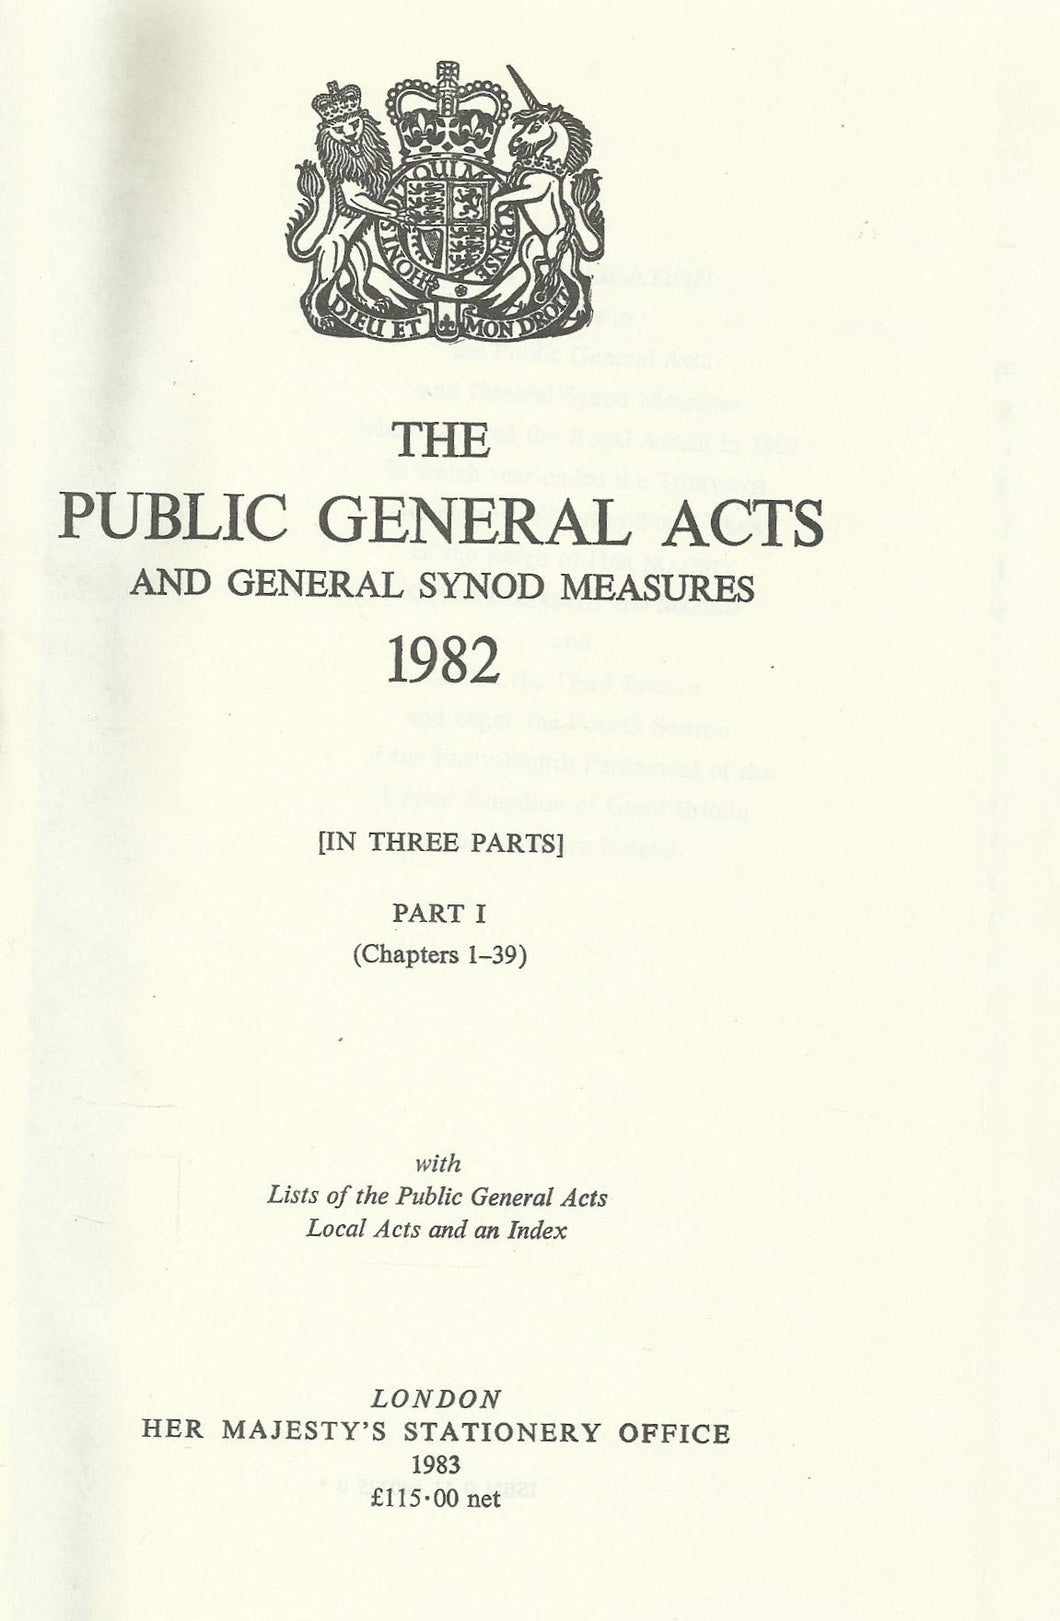 The Public General Acts and General Synod Measures: With Lists of the Public General Acts, Local Acts and an Index